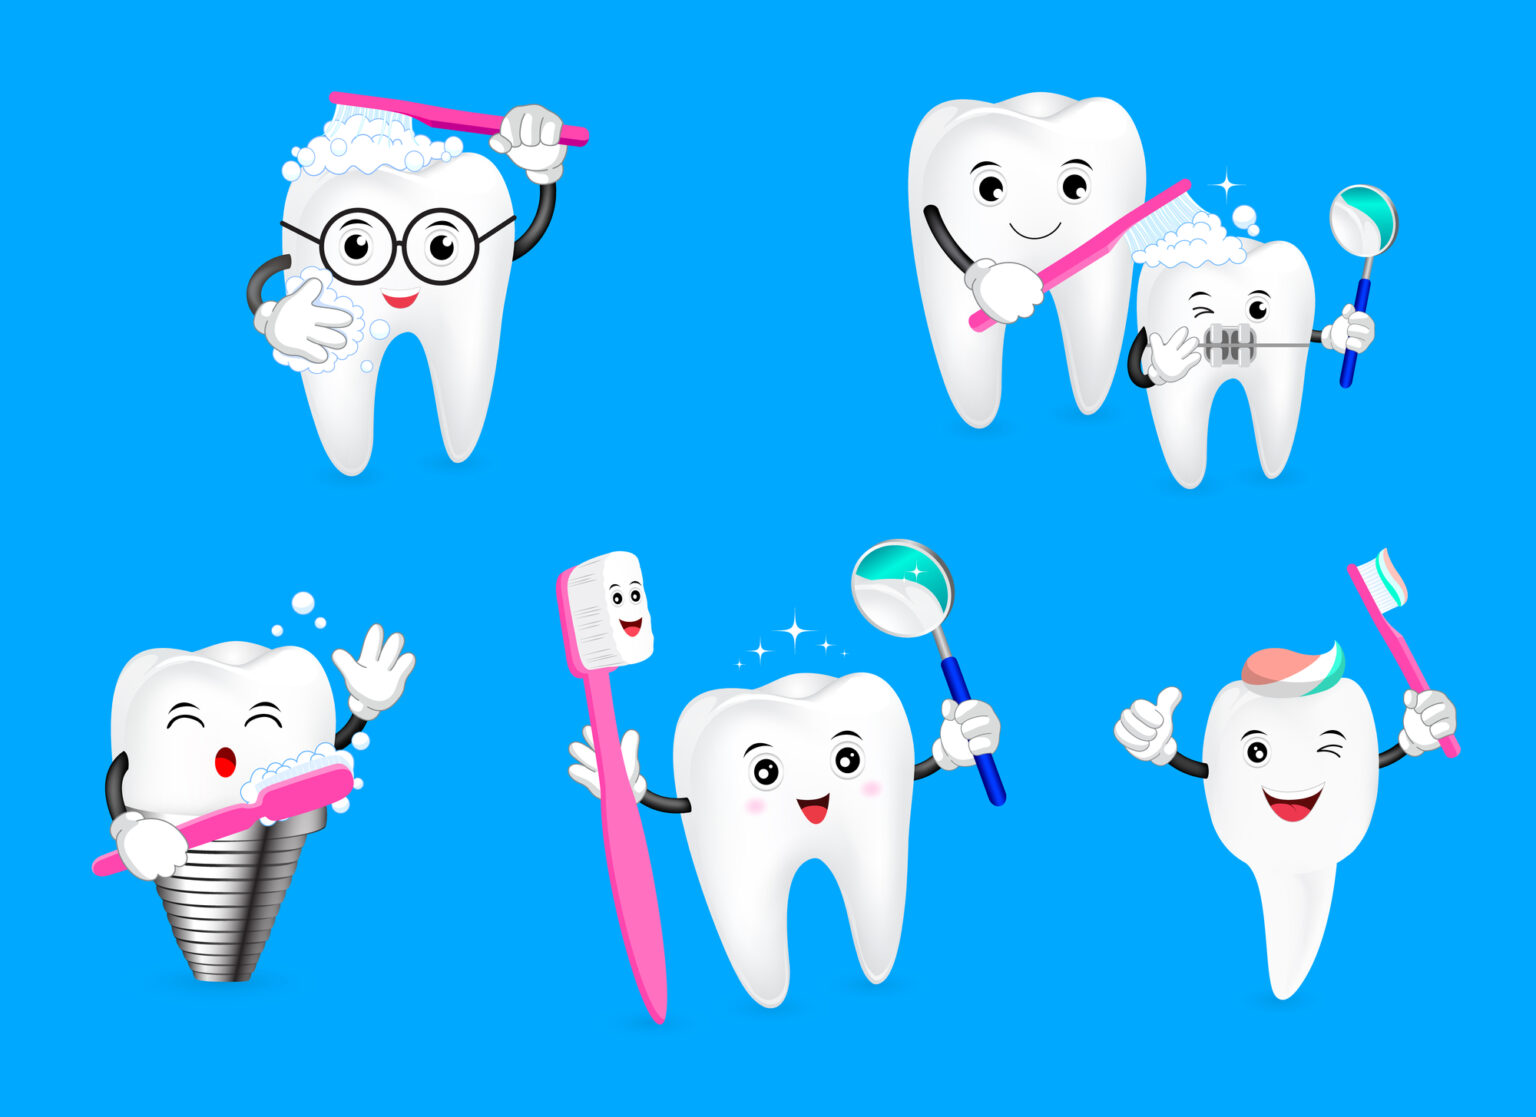 A collection of cartoon teeth characters engaging in various dental hygiene activities such as brushing, flossing, and rinsing against a blue background at a Dallas dental clinic.